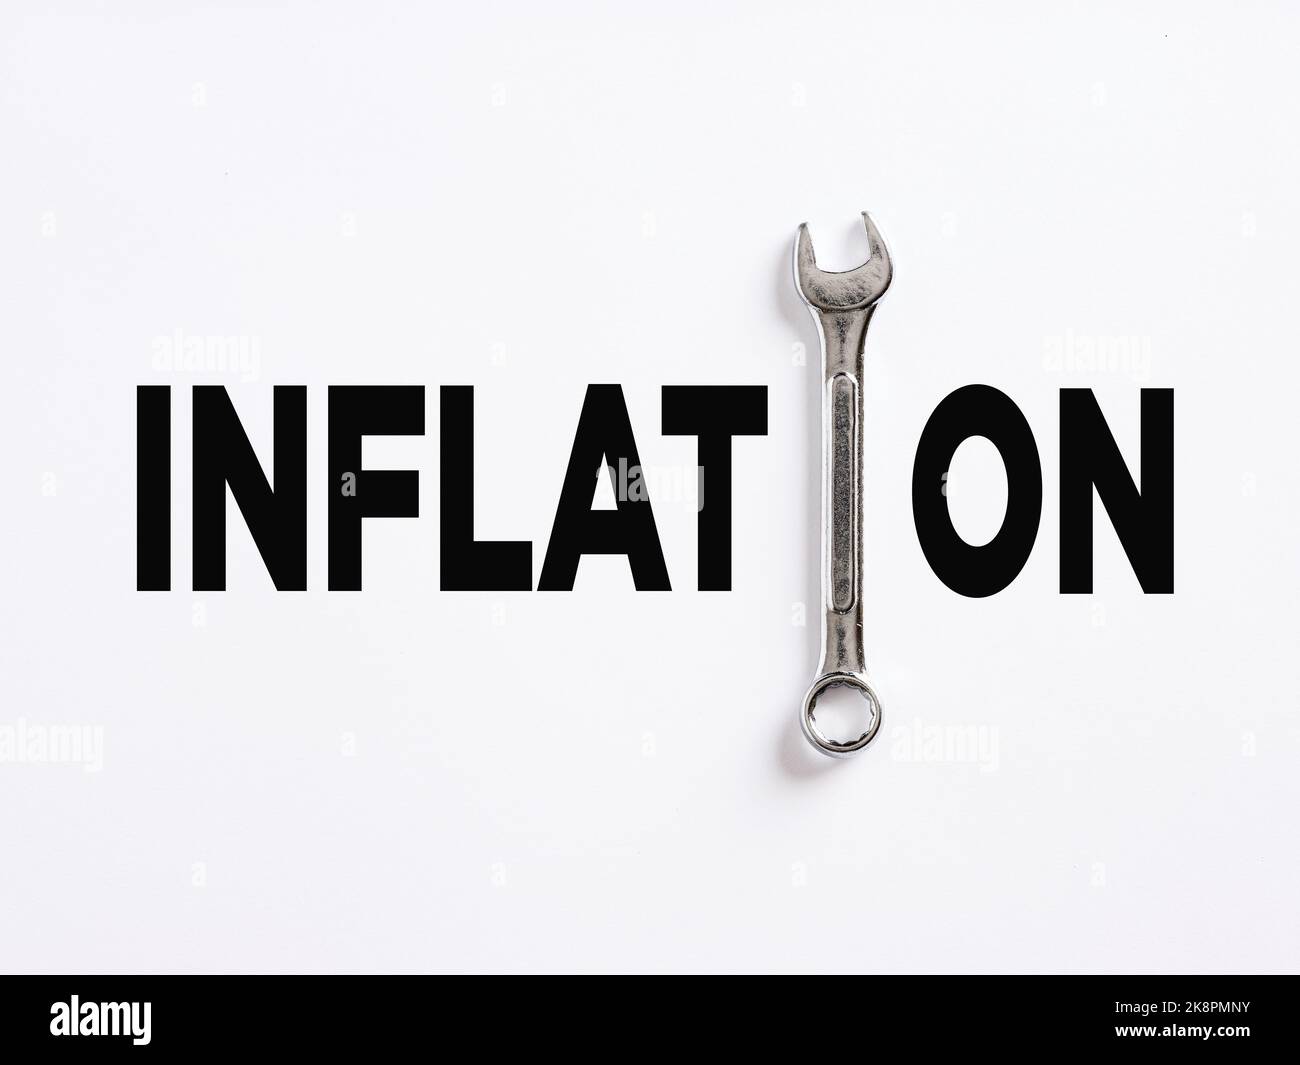 The word inflation written with a wrench. Fixing inflation, fight with inflation strategies concept. Stock Photo